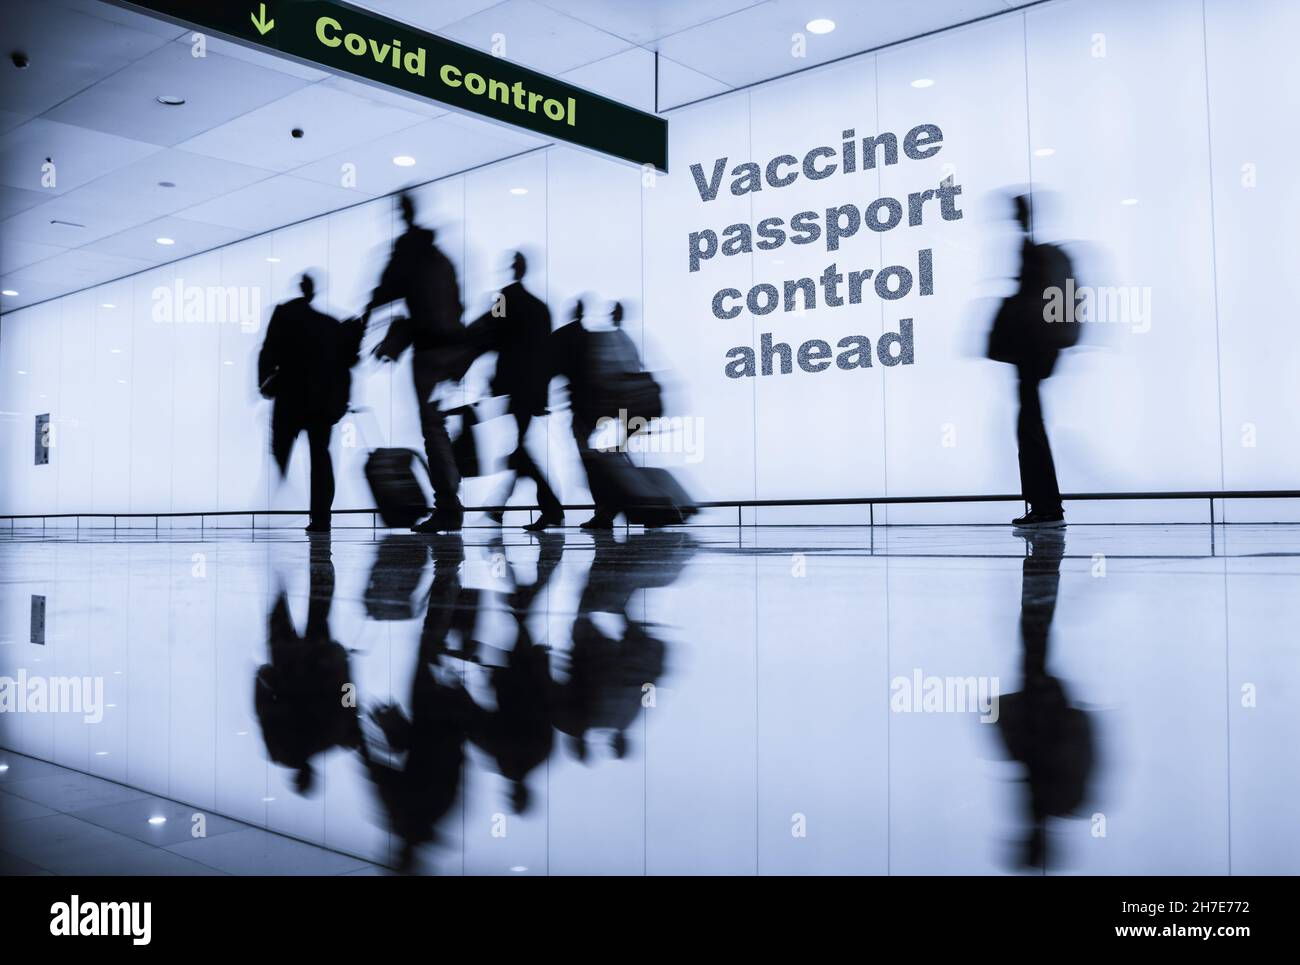 Covid vaccine airport concept image. Businessmen with luggage arriving at airport arrivals Covid control. Stock Photo